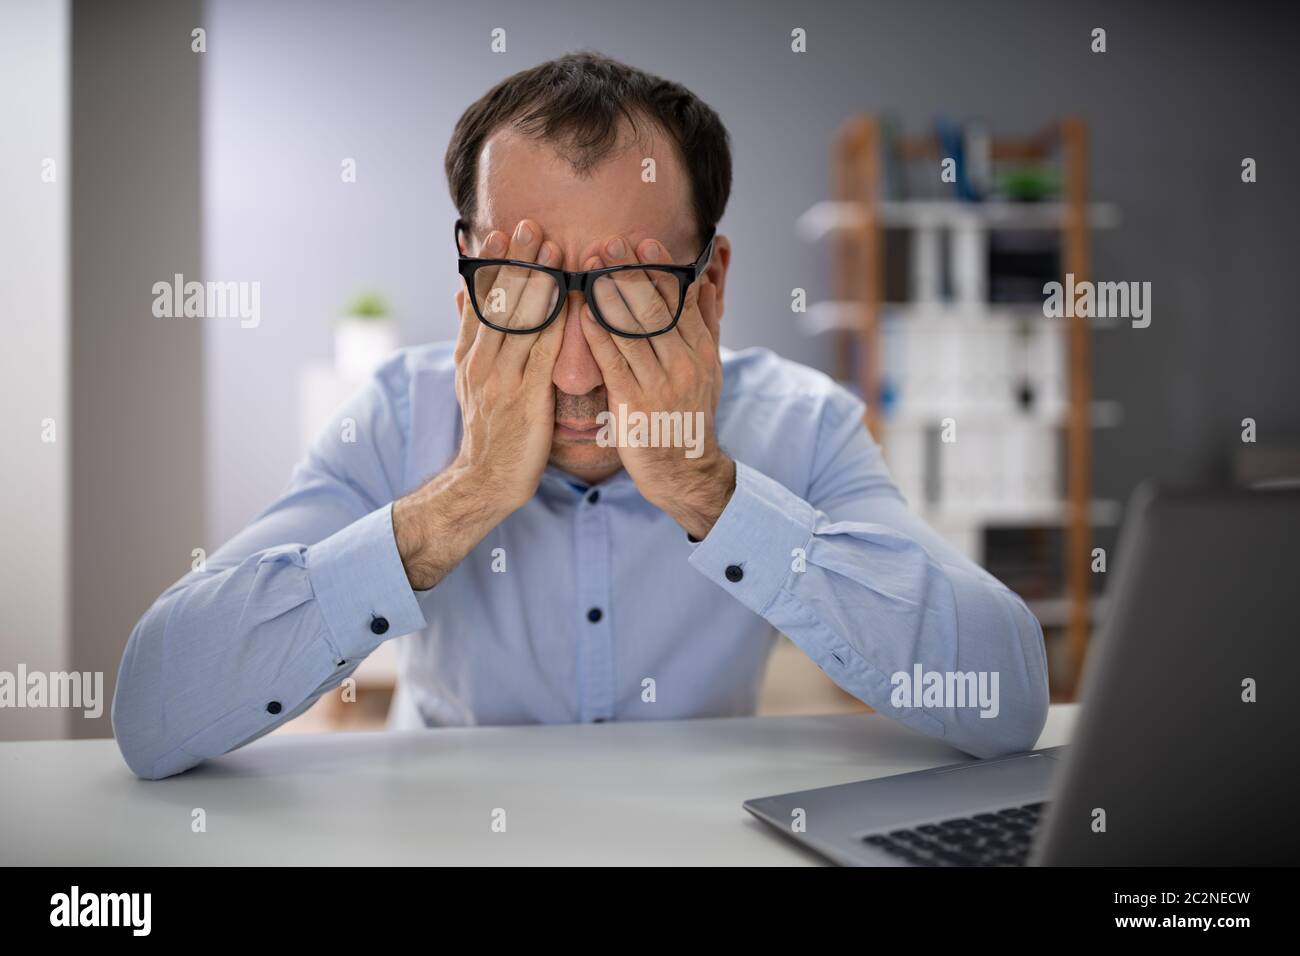 Man's Hand Over The Face With Eyeglasses In Office Stock Photo